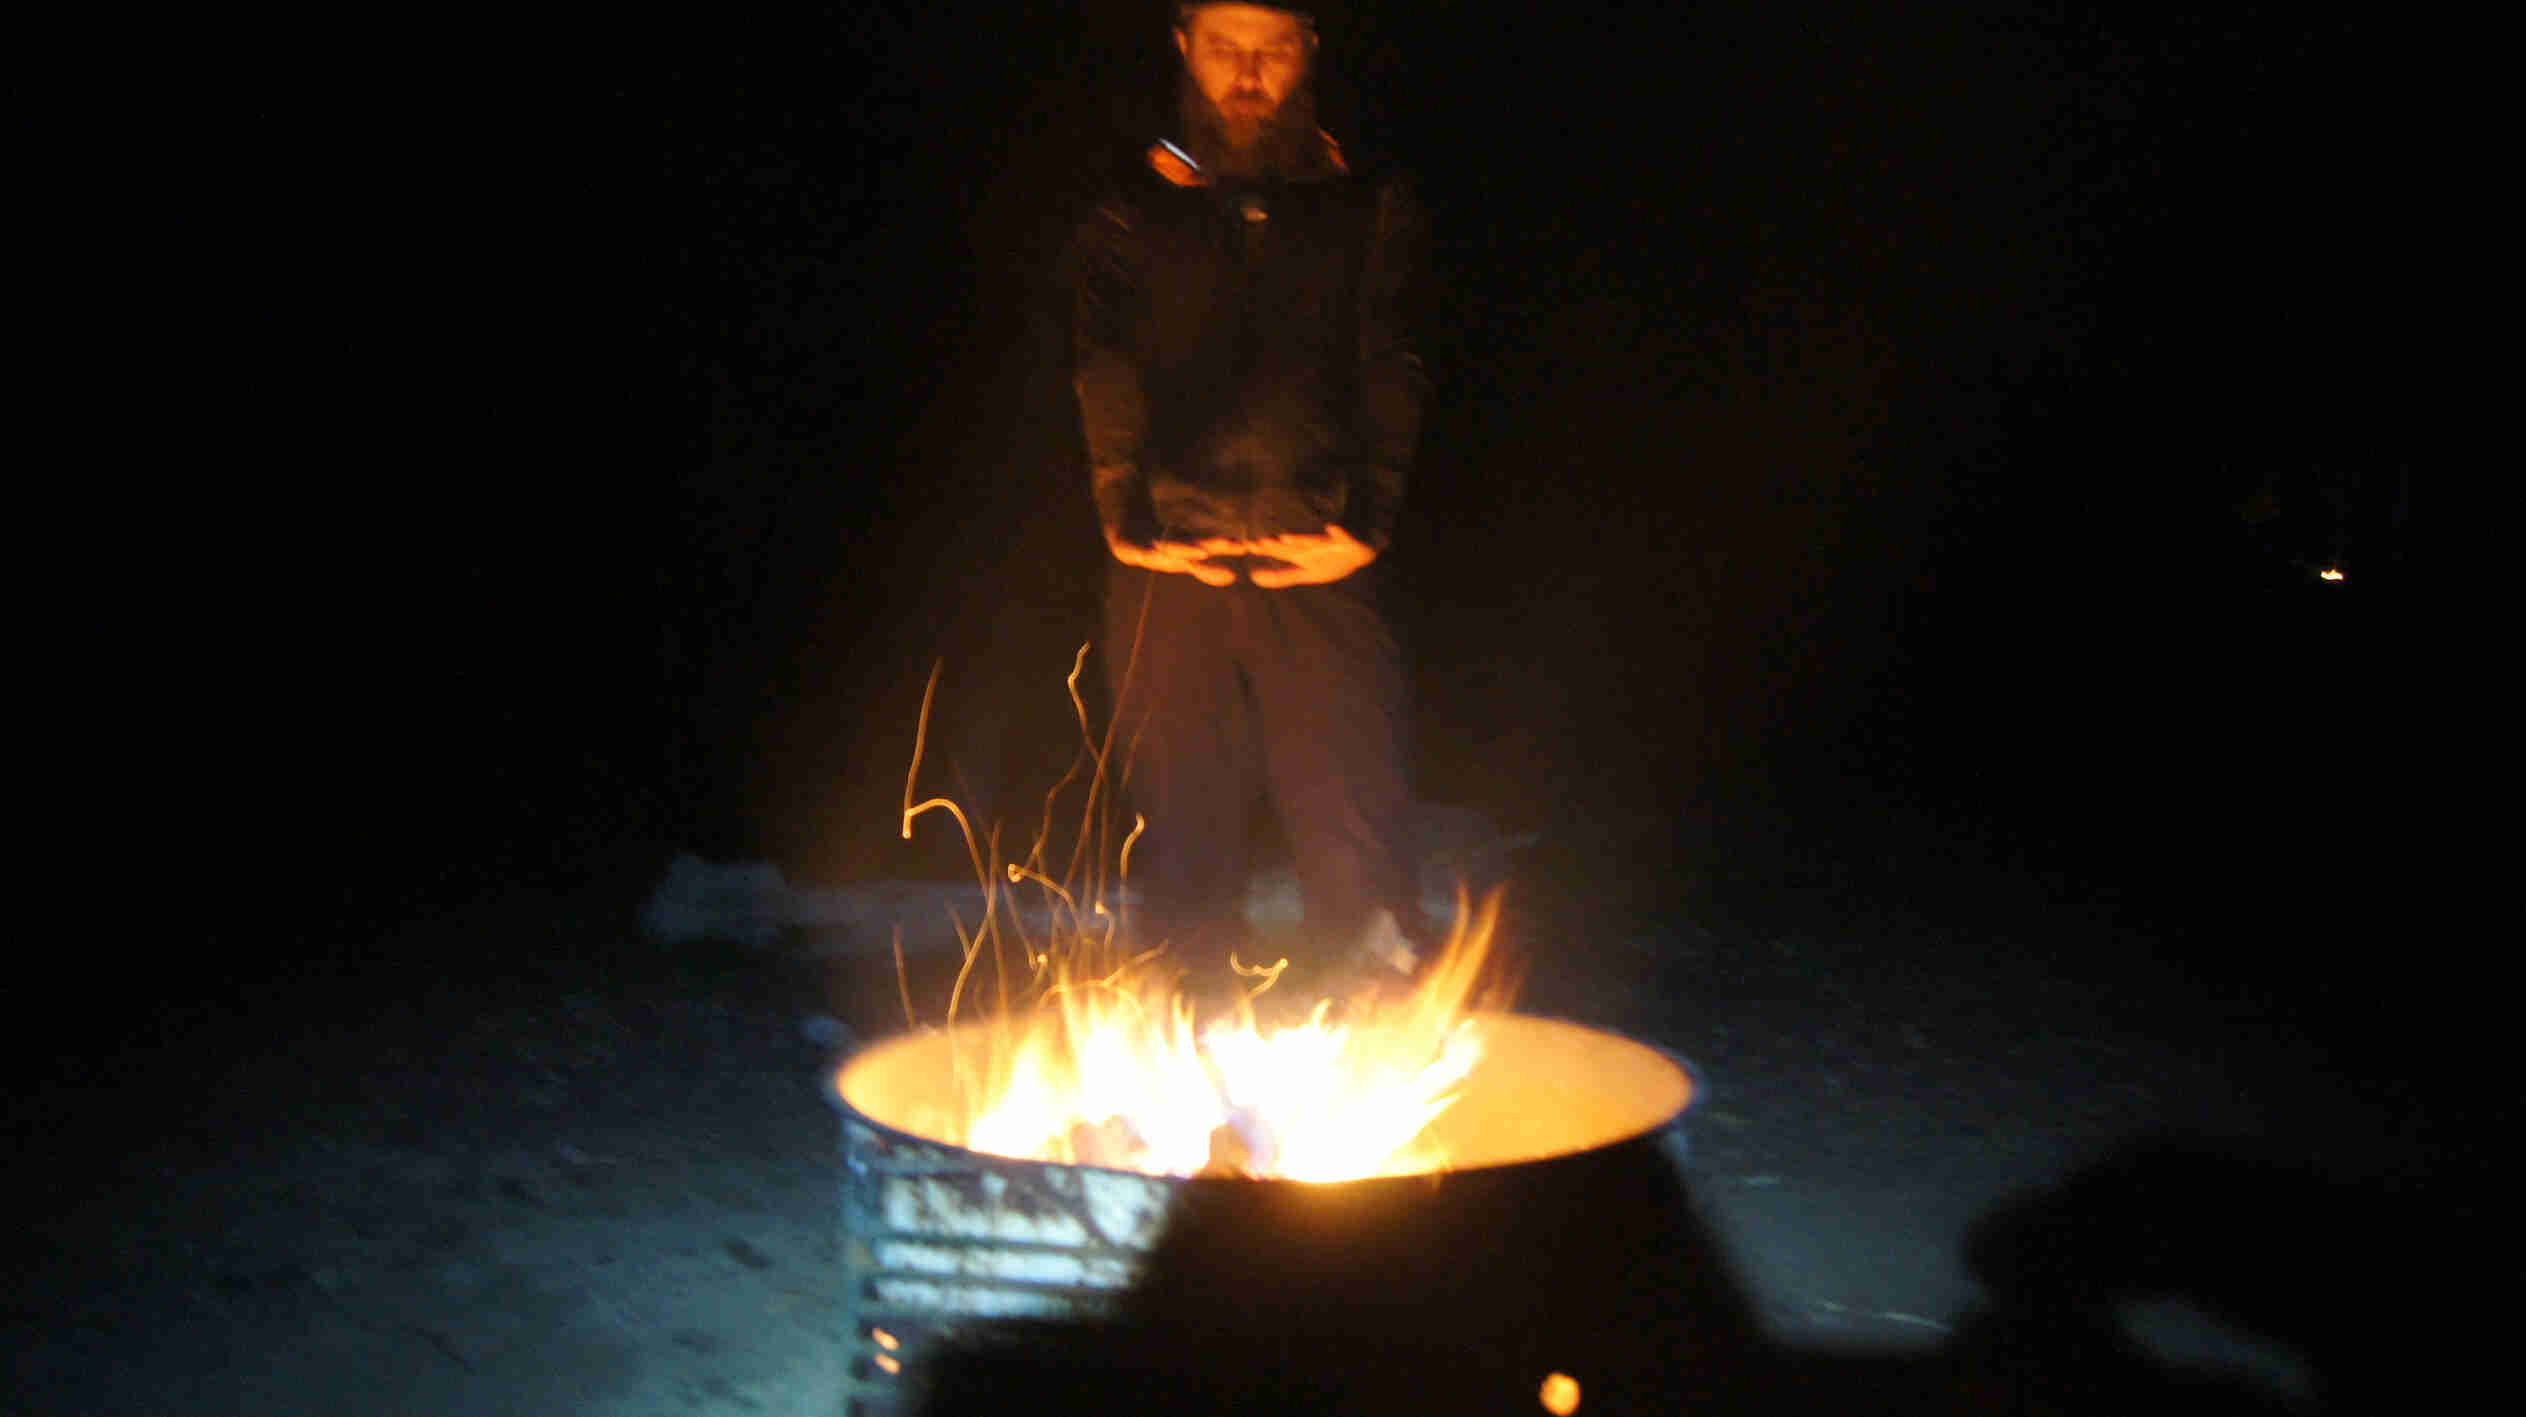 A person warming their hands above a fire in a burn barrel, at night